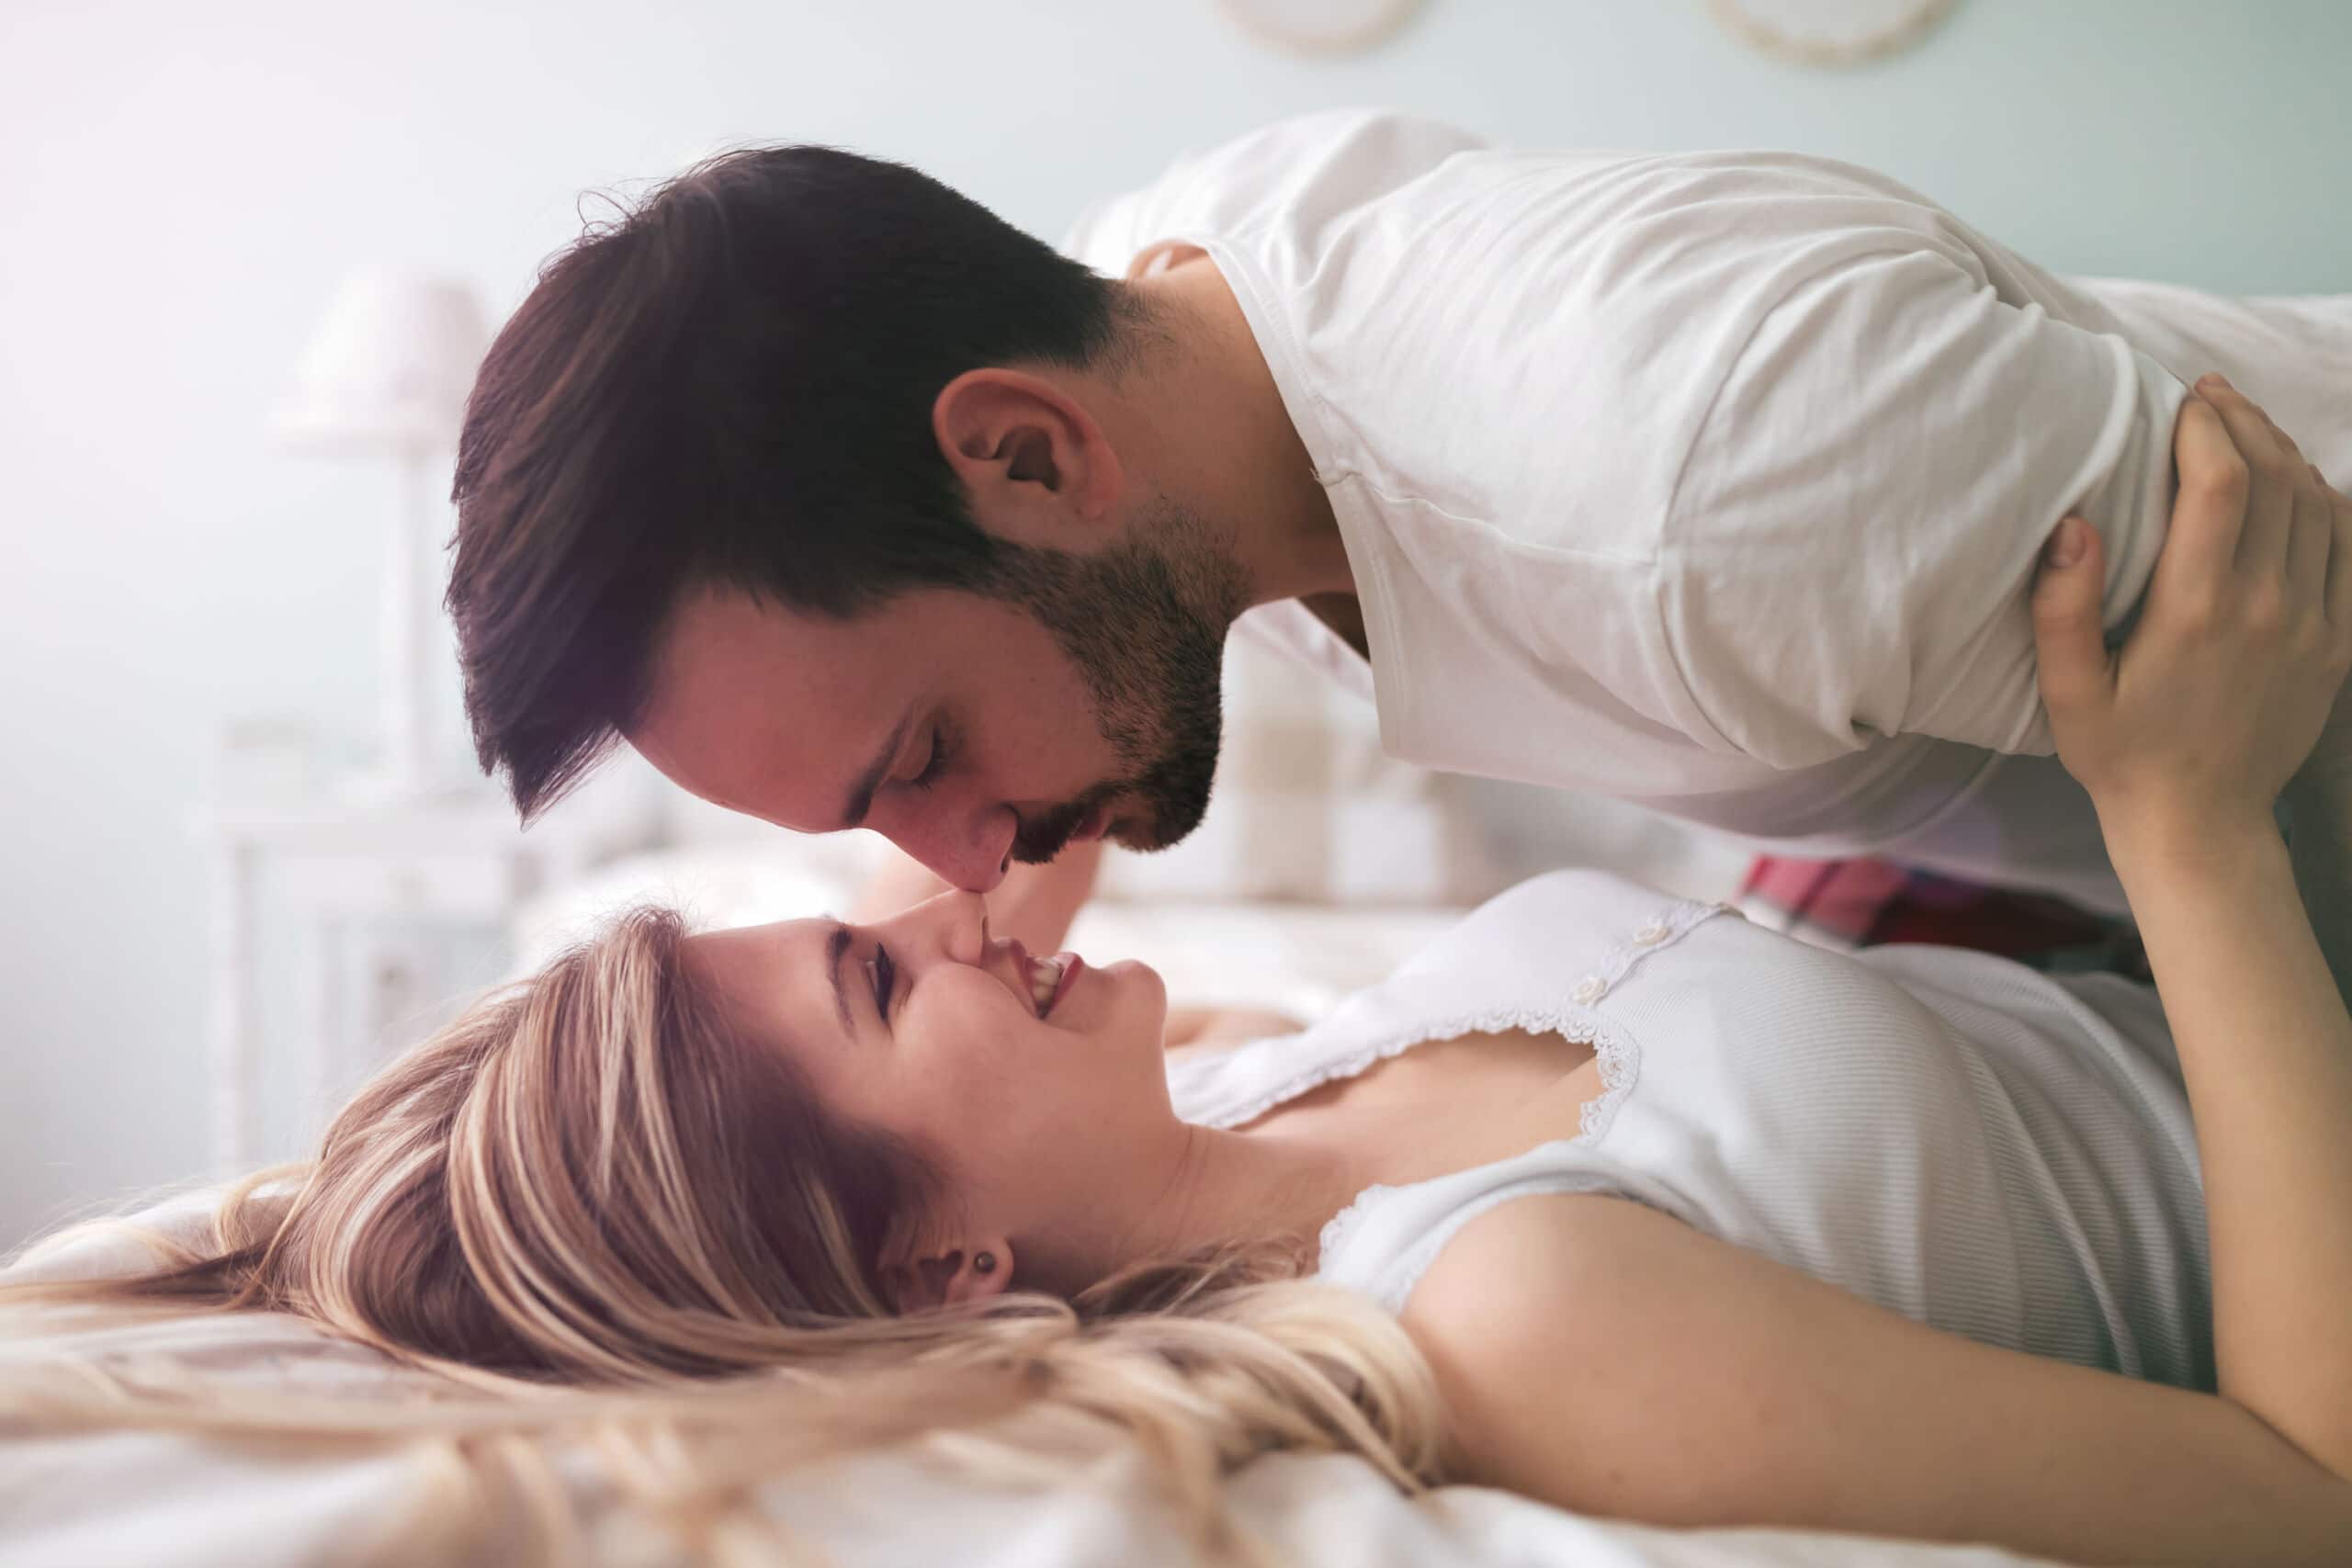 More Sex in My Marriage